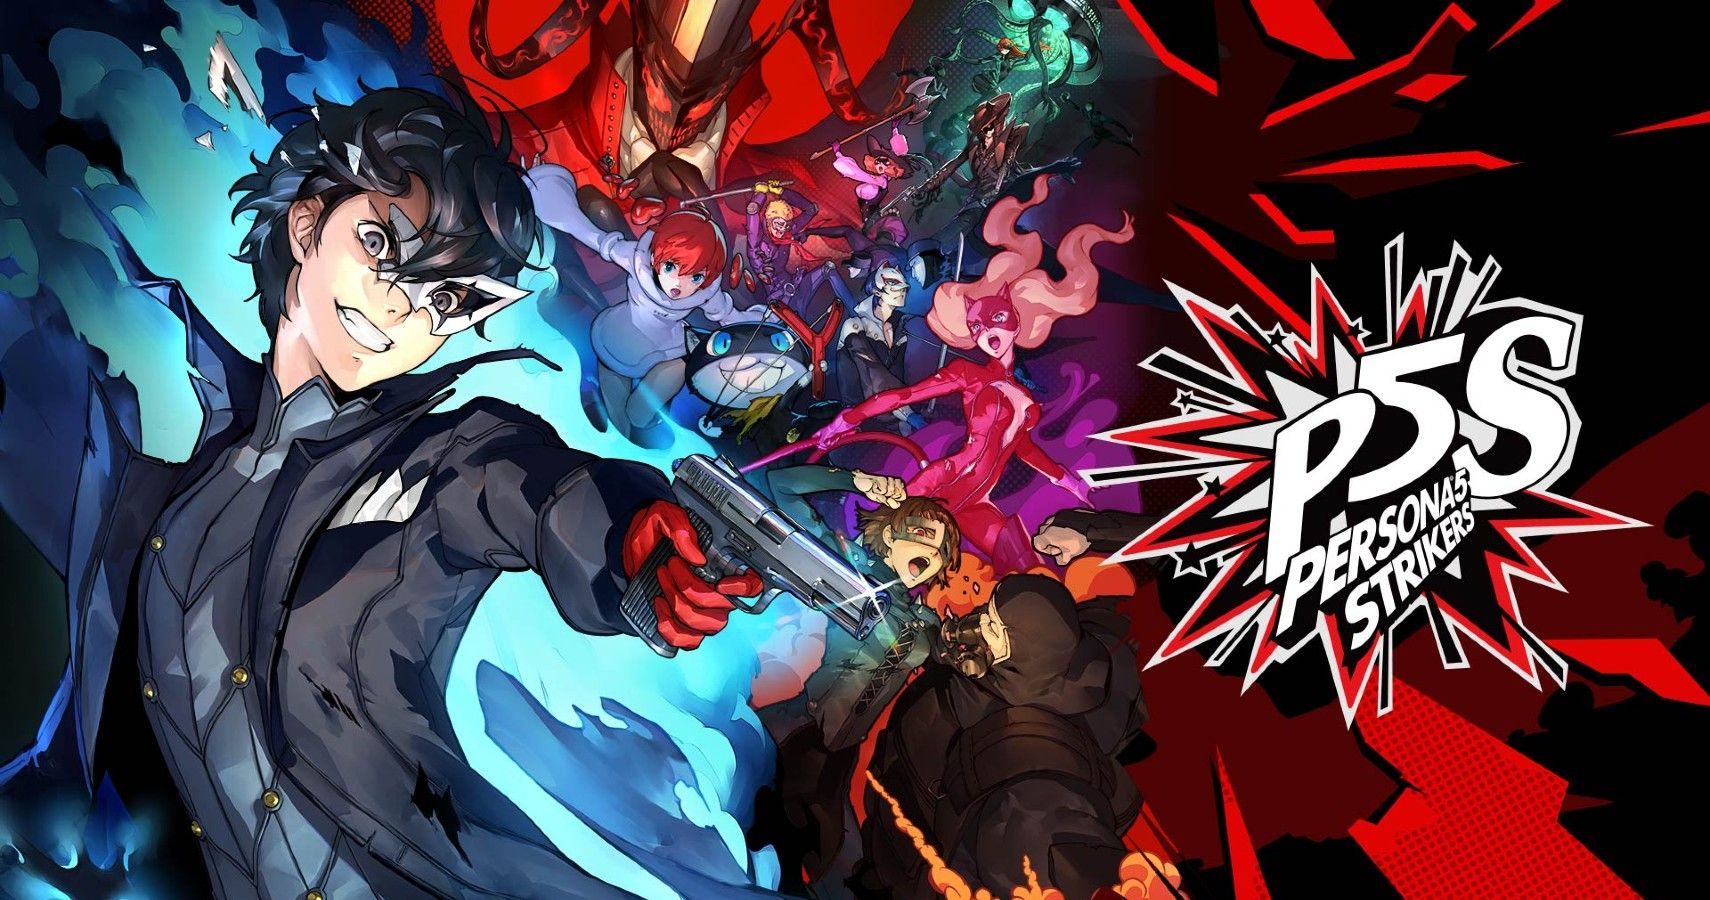 Official Art for Persona 5 Strikers